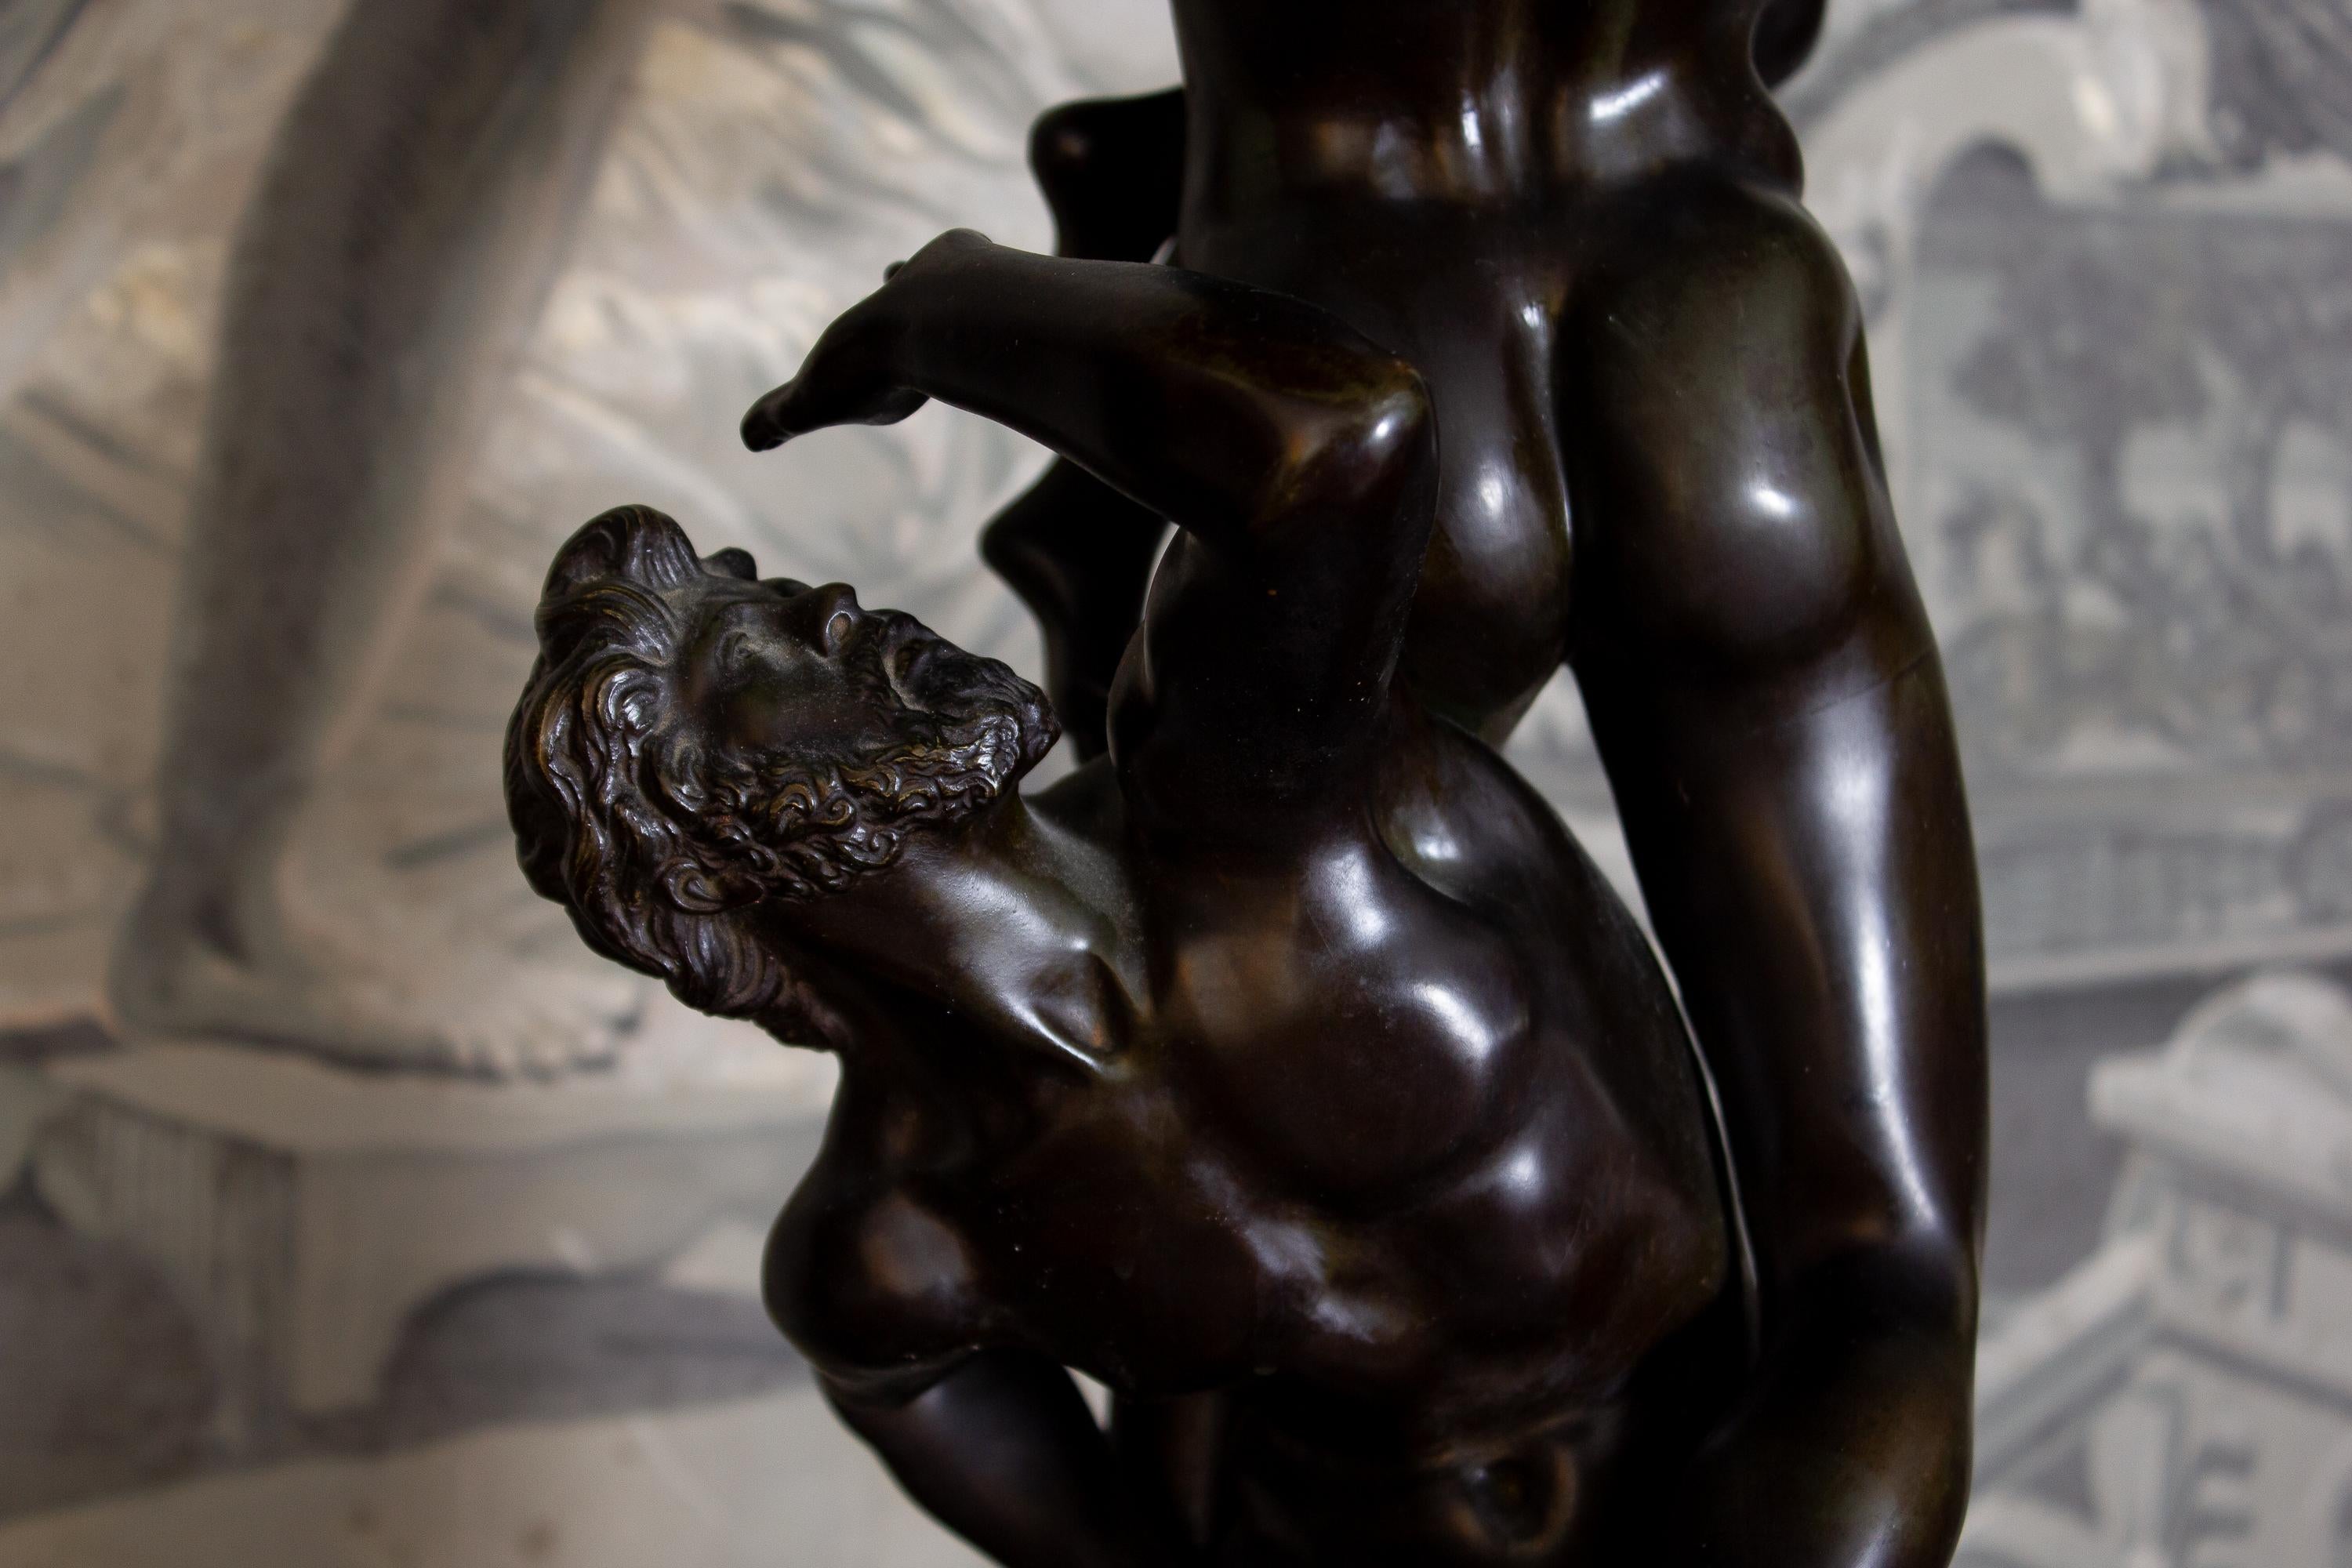 Fine Group of Sculptures in Bronze after  Jean de Boulogne (Giambologna)
The torturously twisting Rape of the Sabine Women  is one of the finest and most technically difficult sculptures in the world. Three intertwined bodies, two men and a woman,